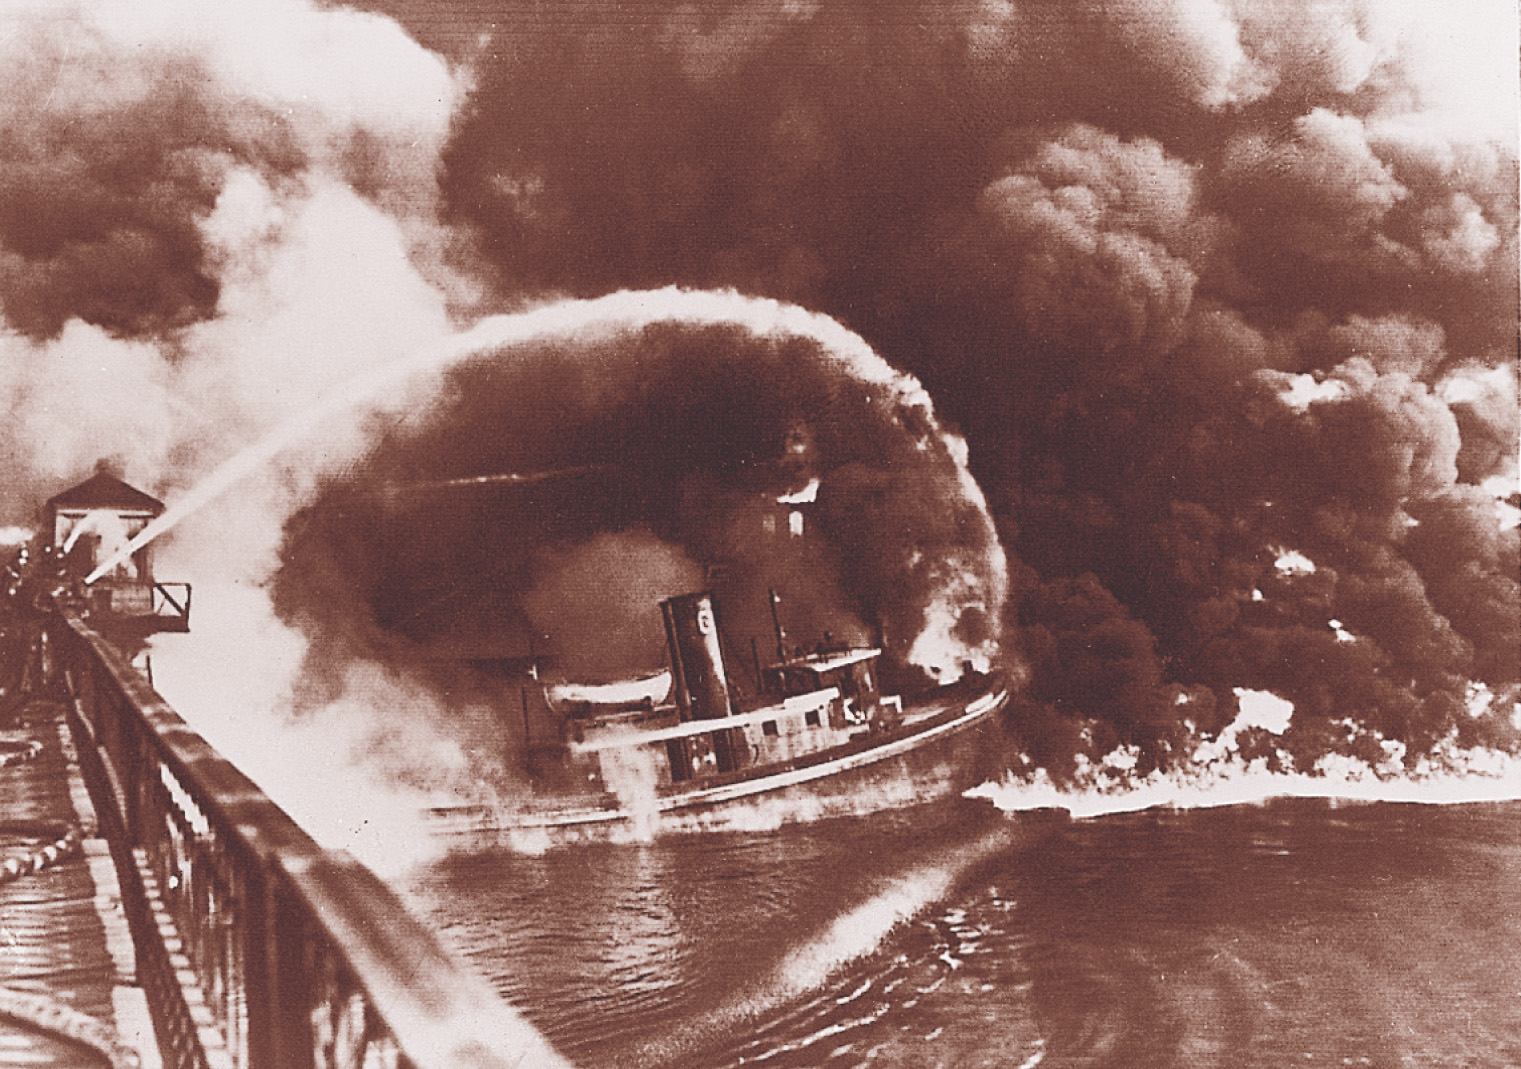 A photo: a tugboat sails toward flames burning on a river. Fireman spray water on the fire, under a sky filled with black clouds.